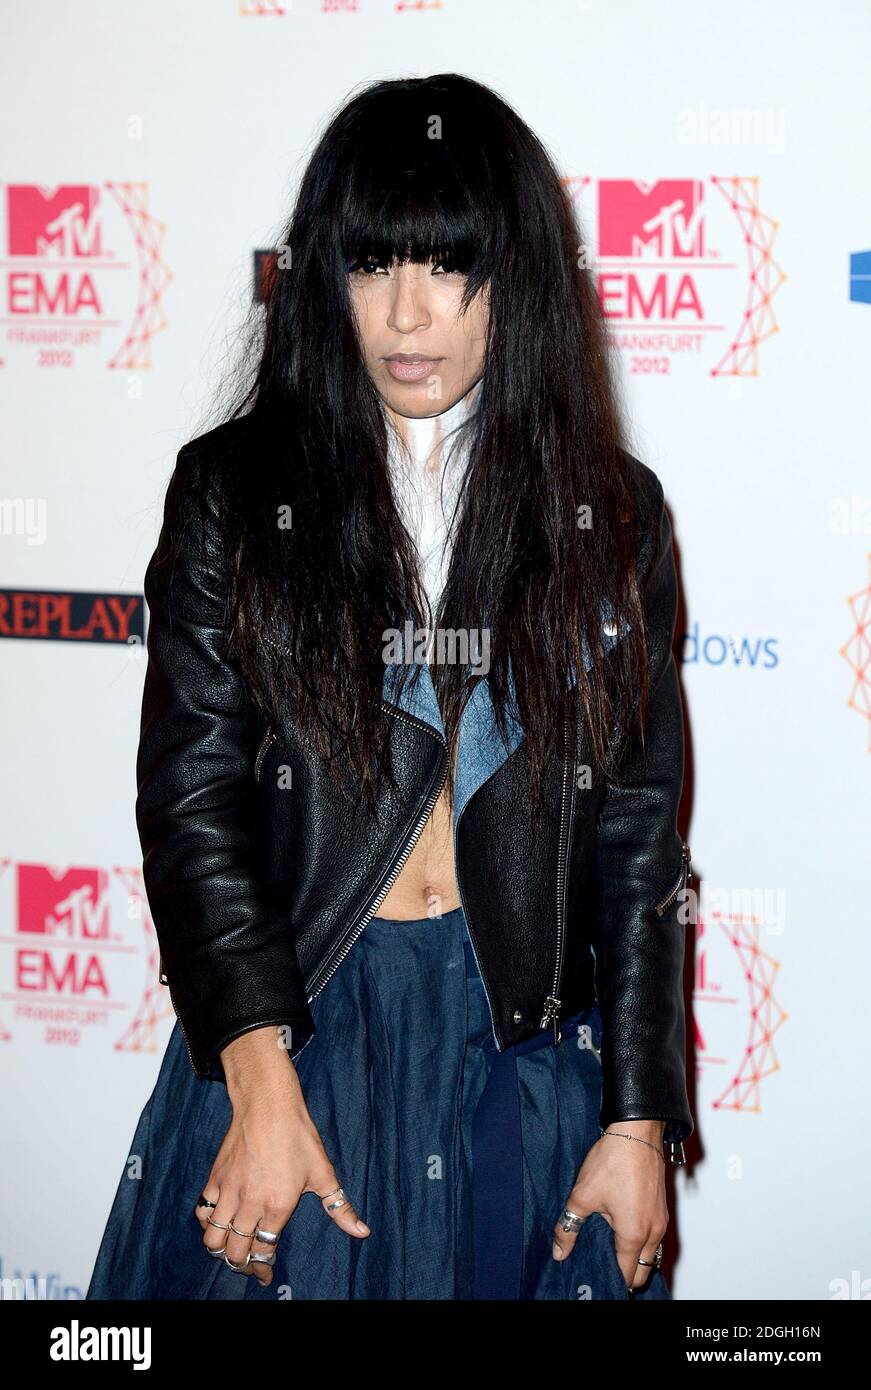 Loreen arriving for the 2012 MTV Europe Music Awards at the Festhalle Frankfurt, Germany. Stock Photo